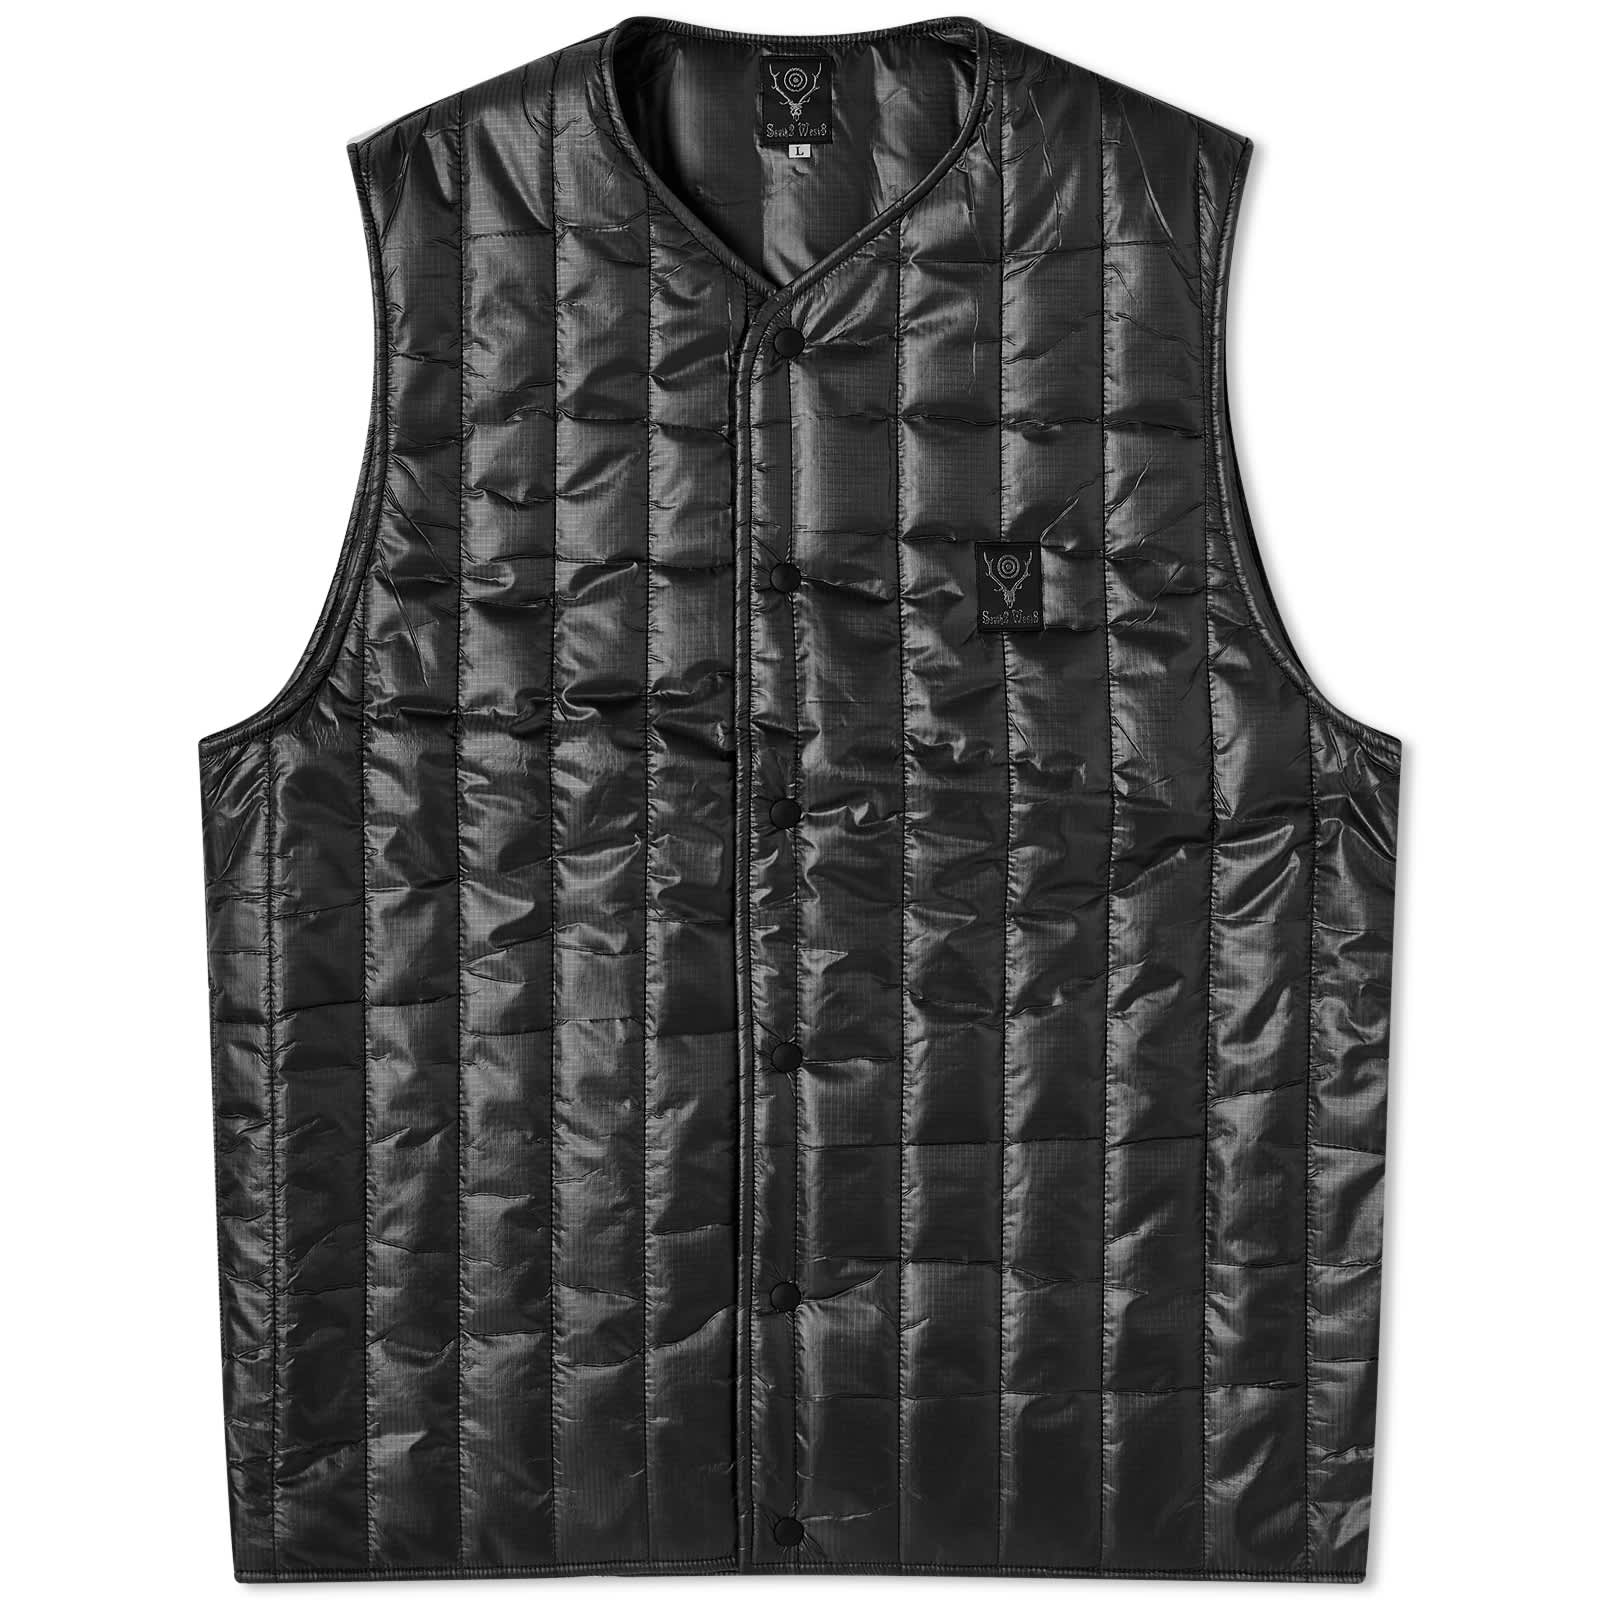 Жилет South2 West8 Quilted Nylon Ripstop, черный жилет zara ripstop черный